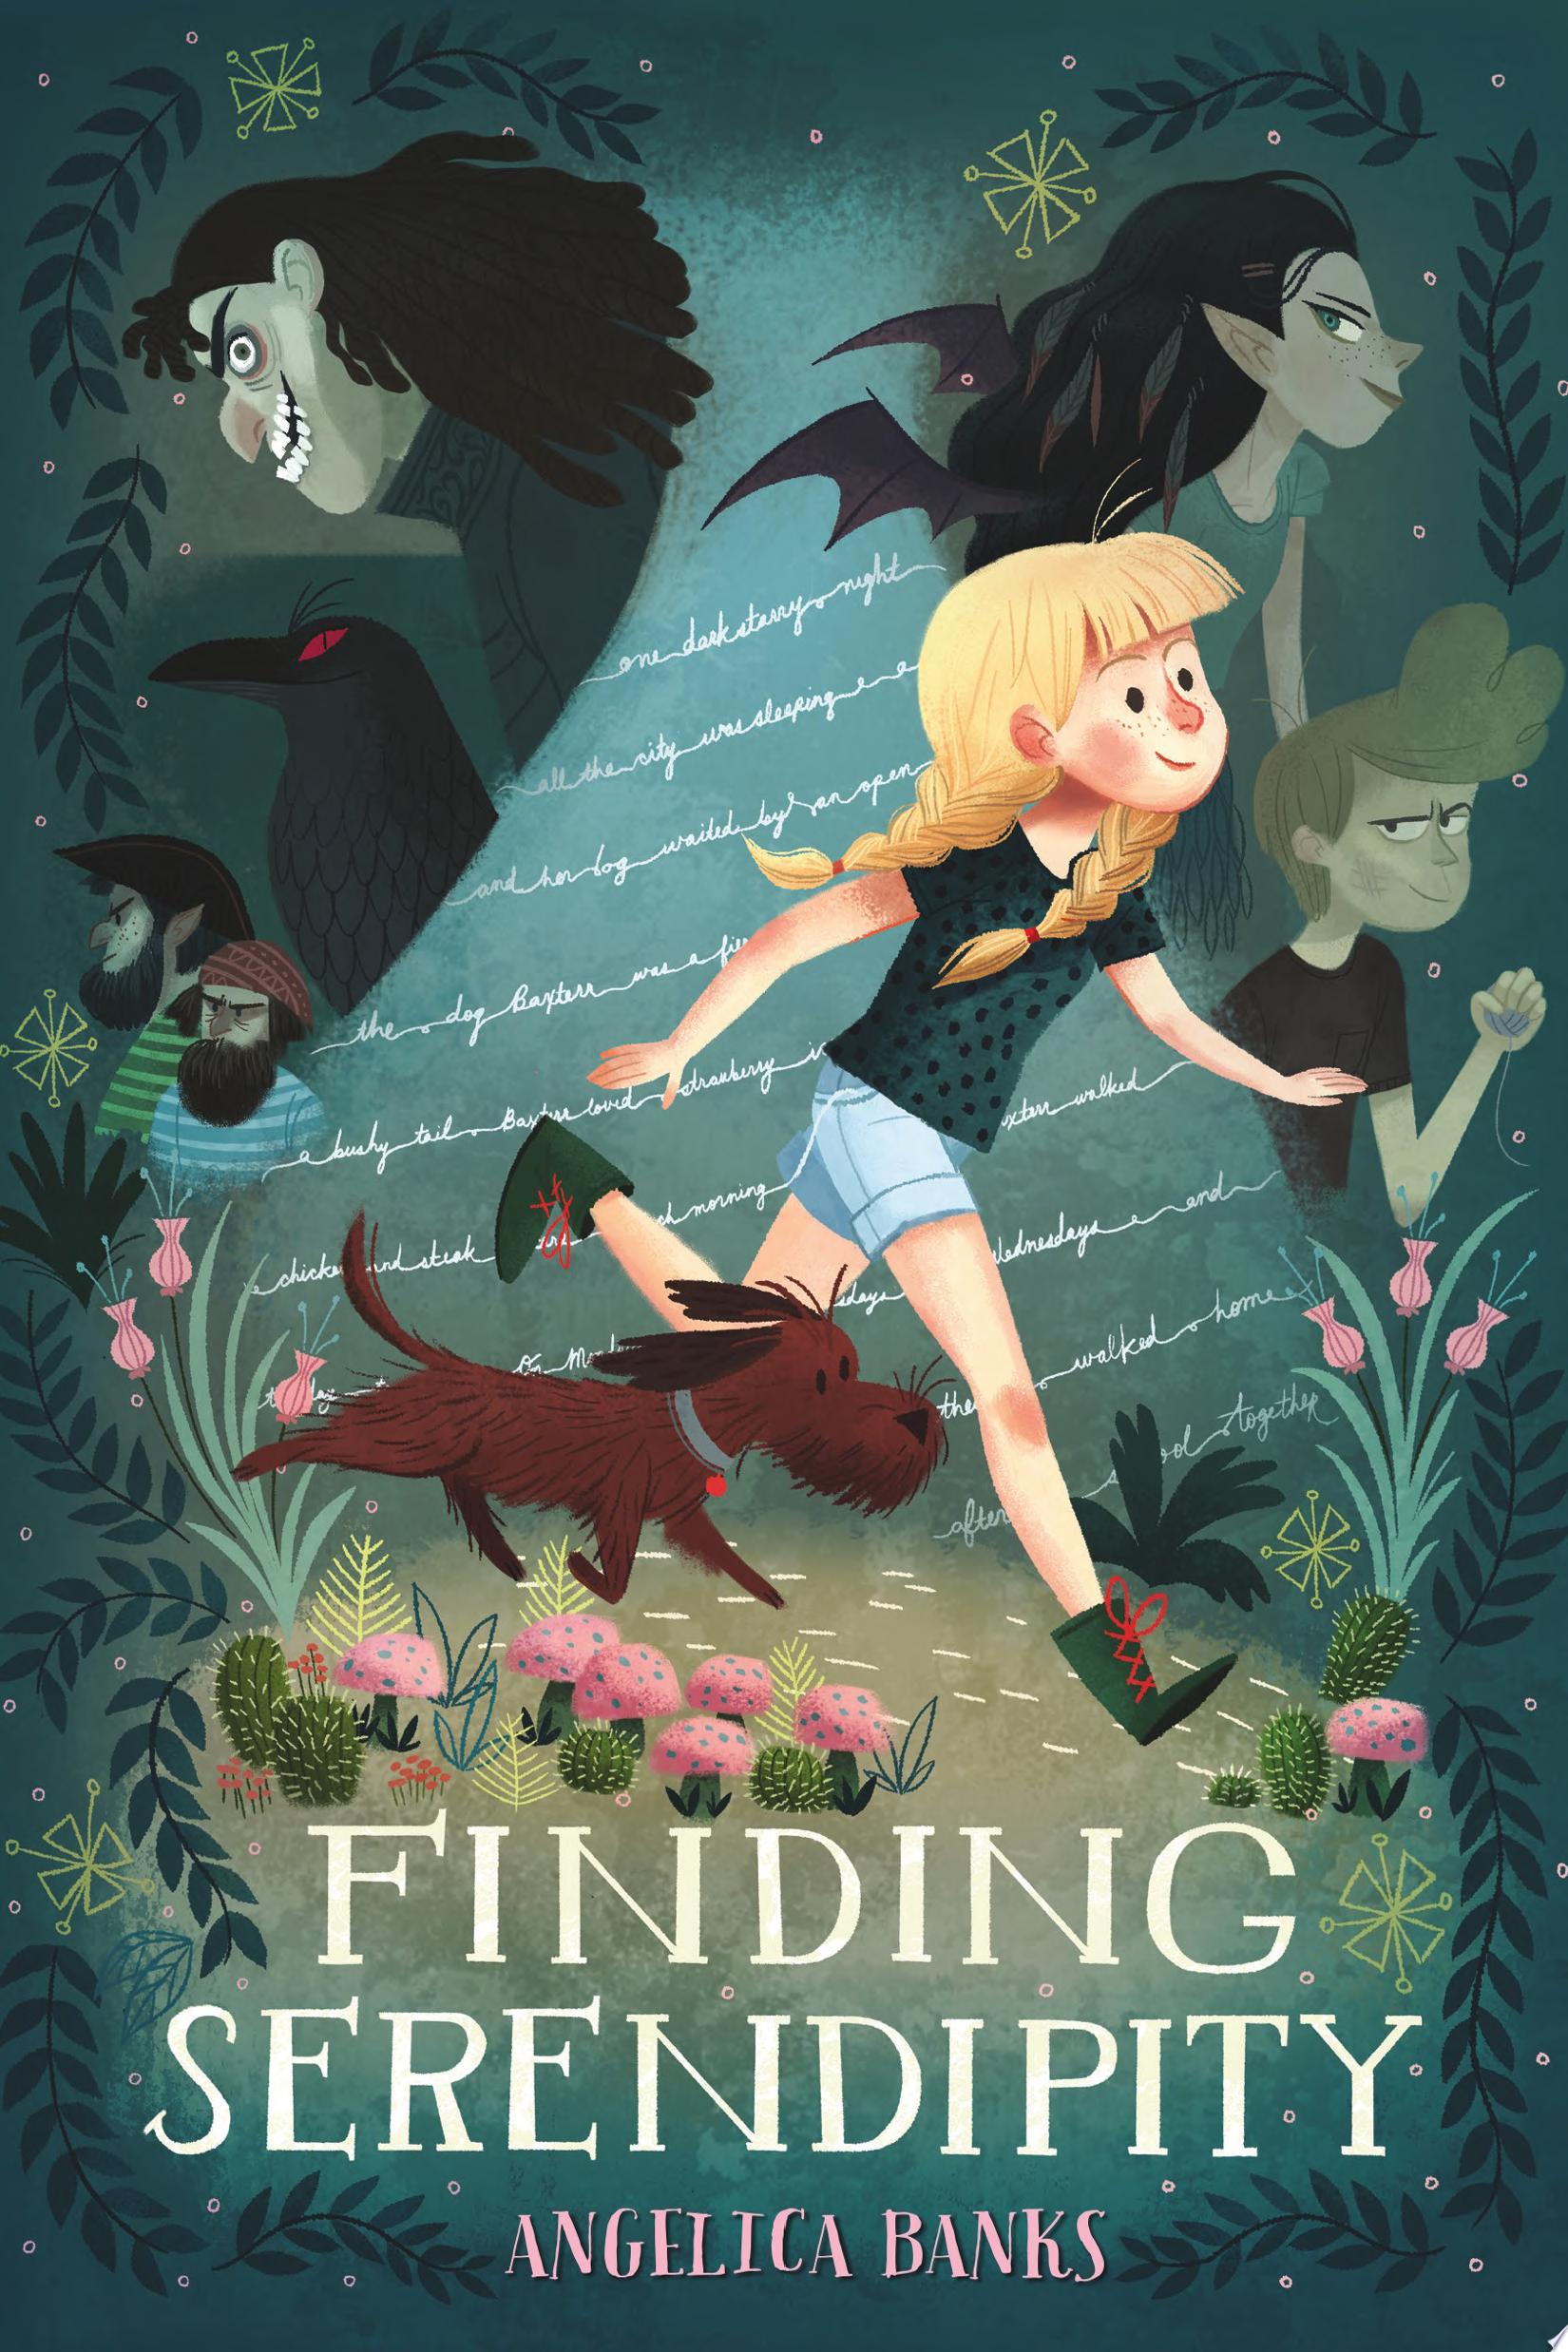 Image for "Finding Serendipity"